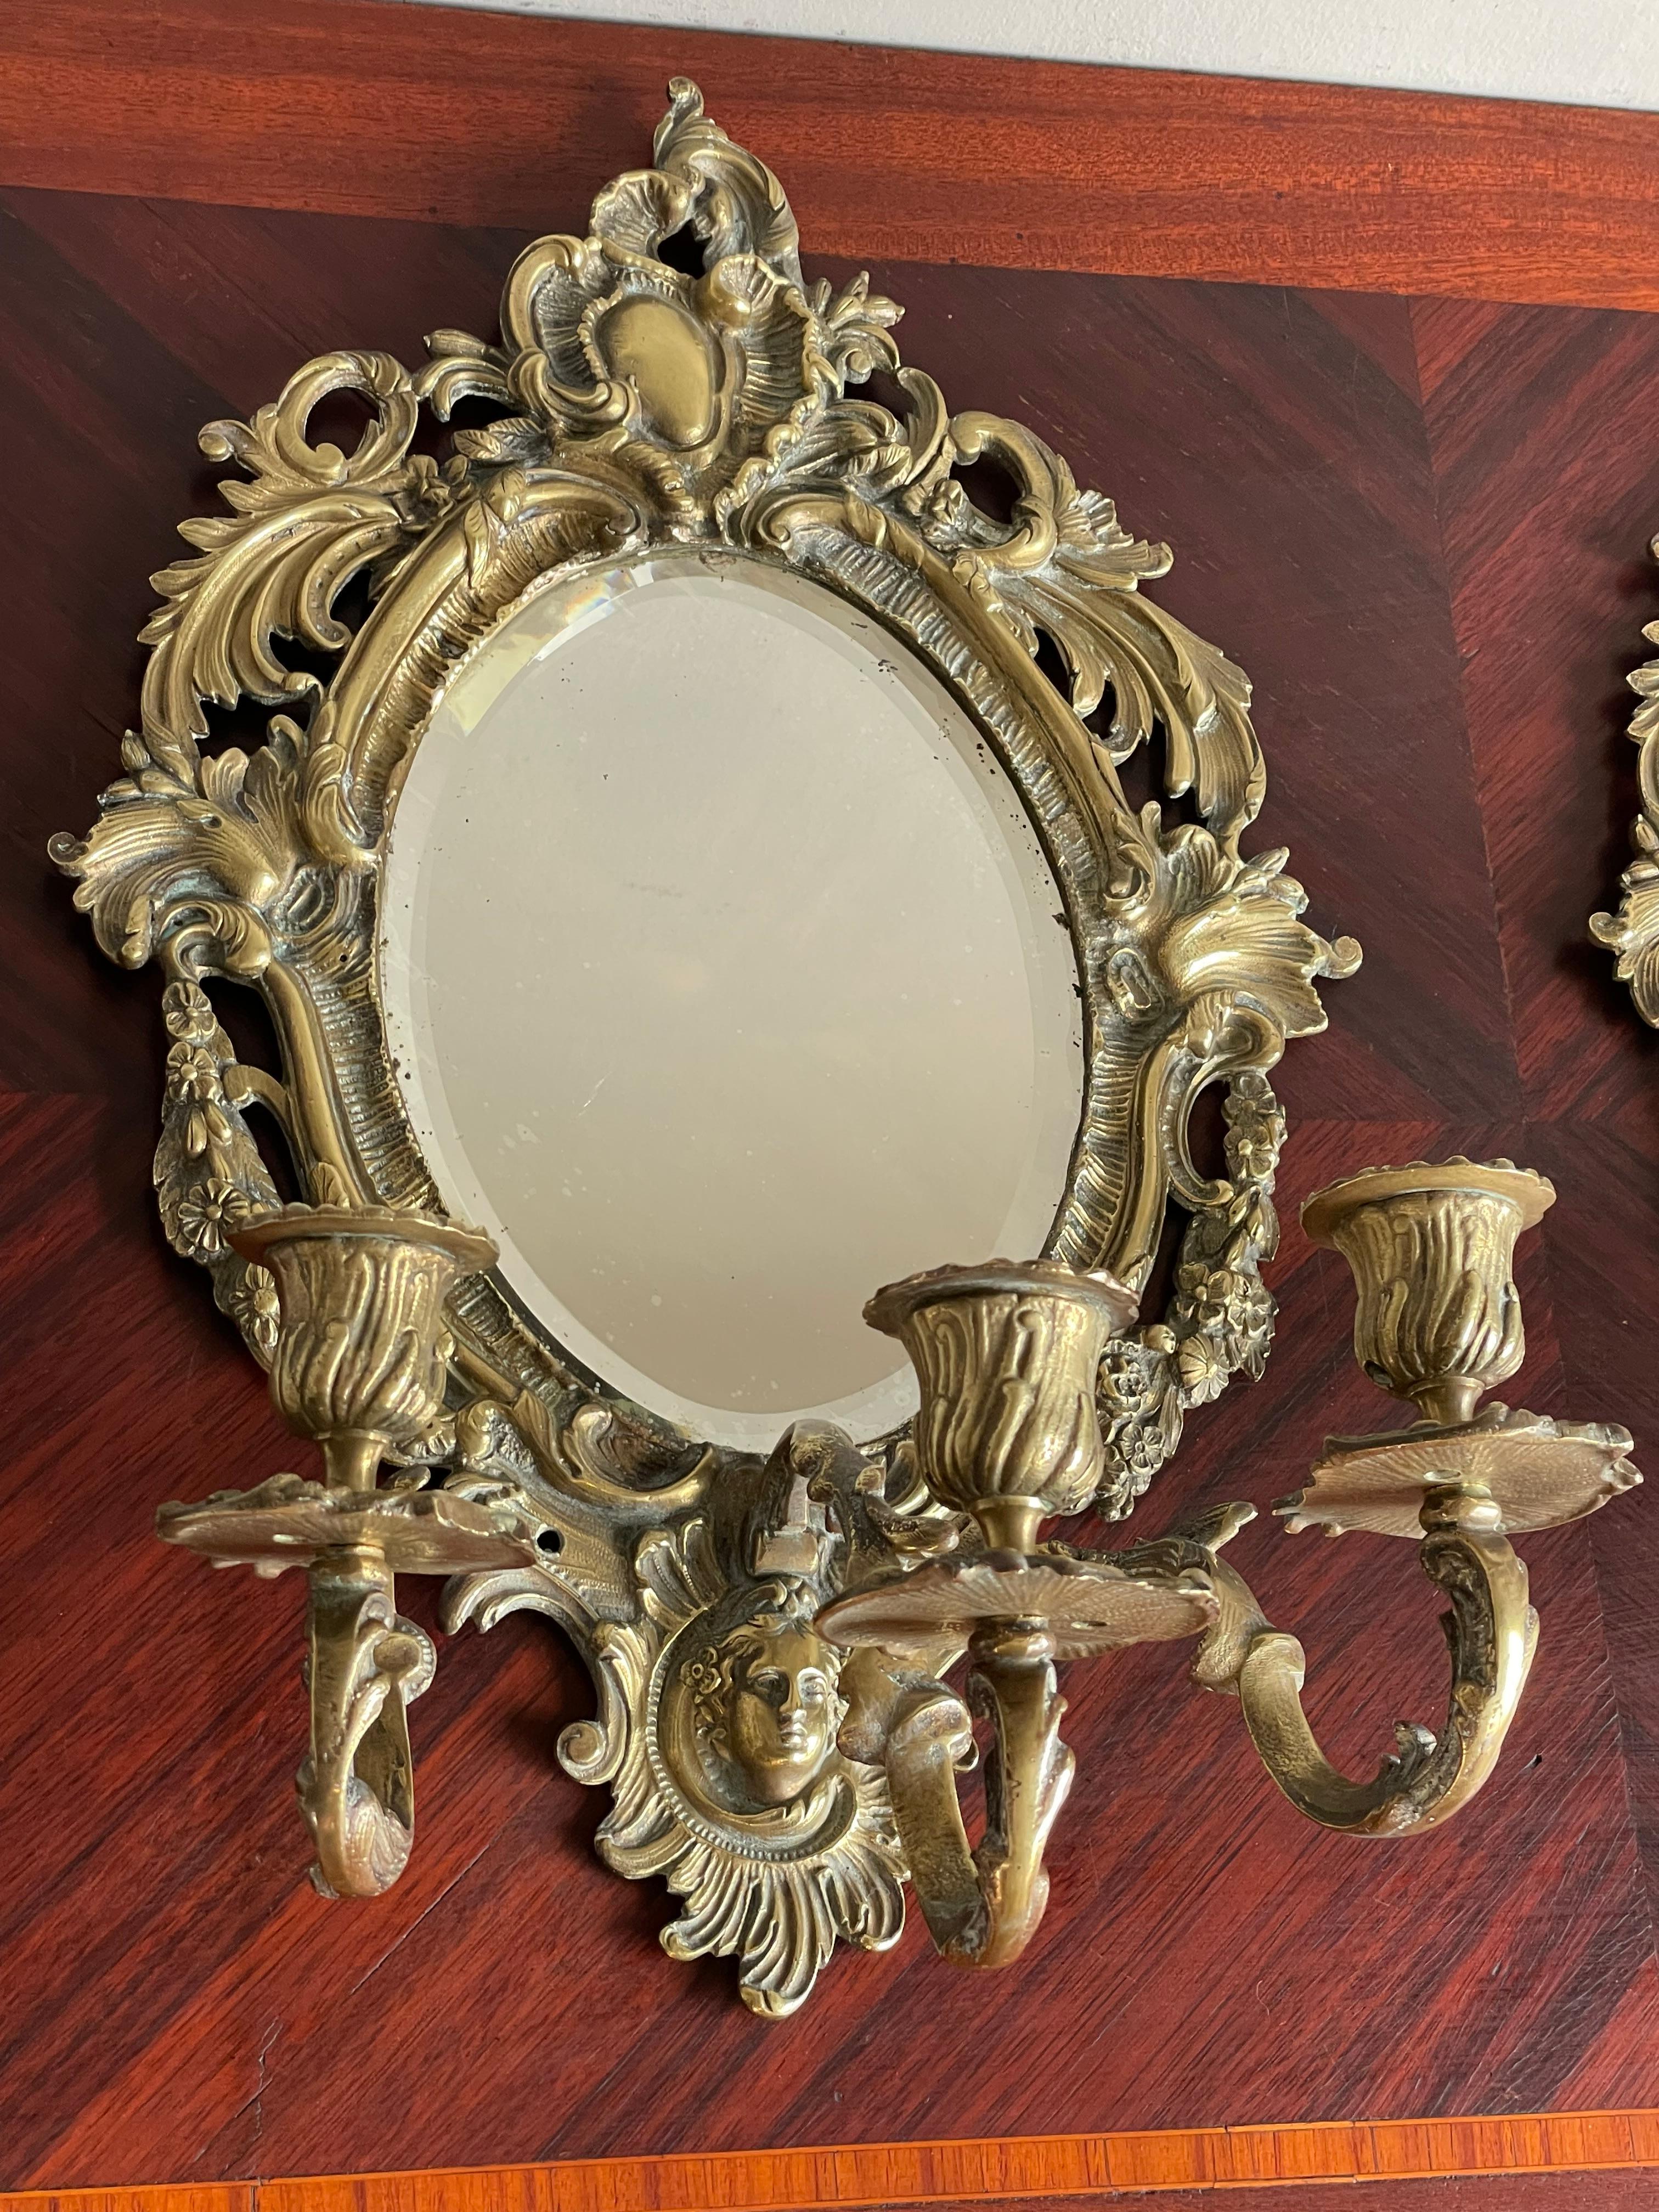 Rococo Revival Antique Pair of Bronze Wall Sconce Candelabras w. Beveled Mirrors & Goddess Mask For Sale